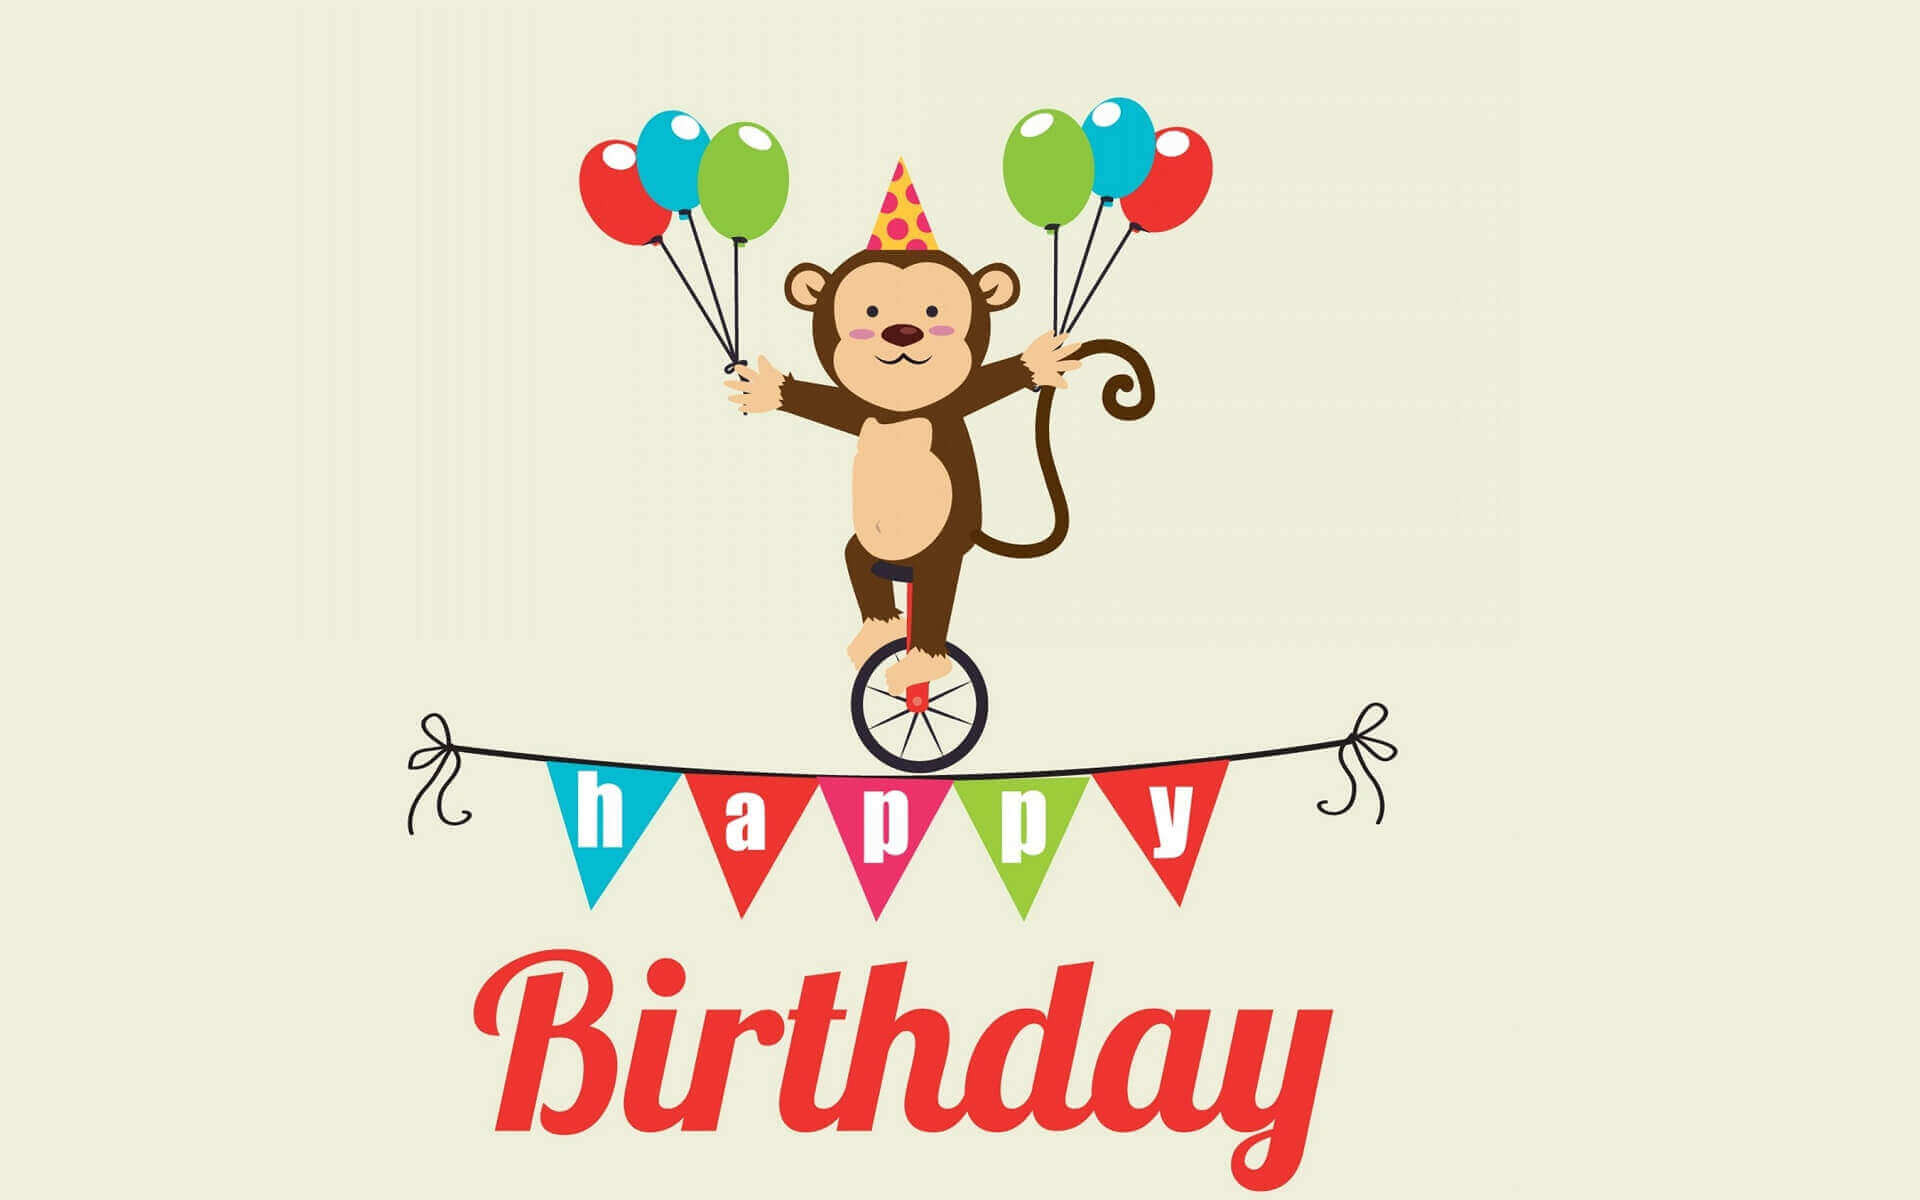 Birthday Wishes Friend Funny
 200 Funny Happy Birthday Wishes Quotes Ever FungiStaaan